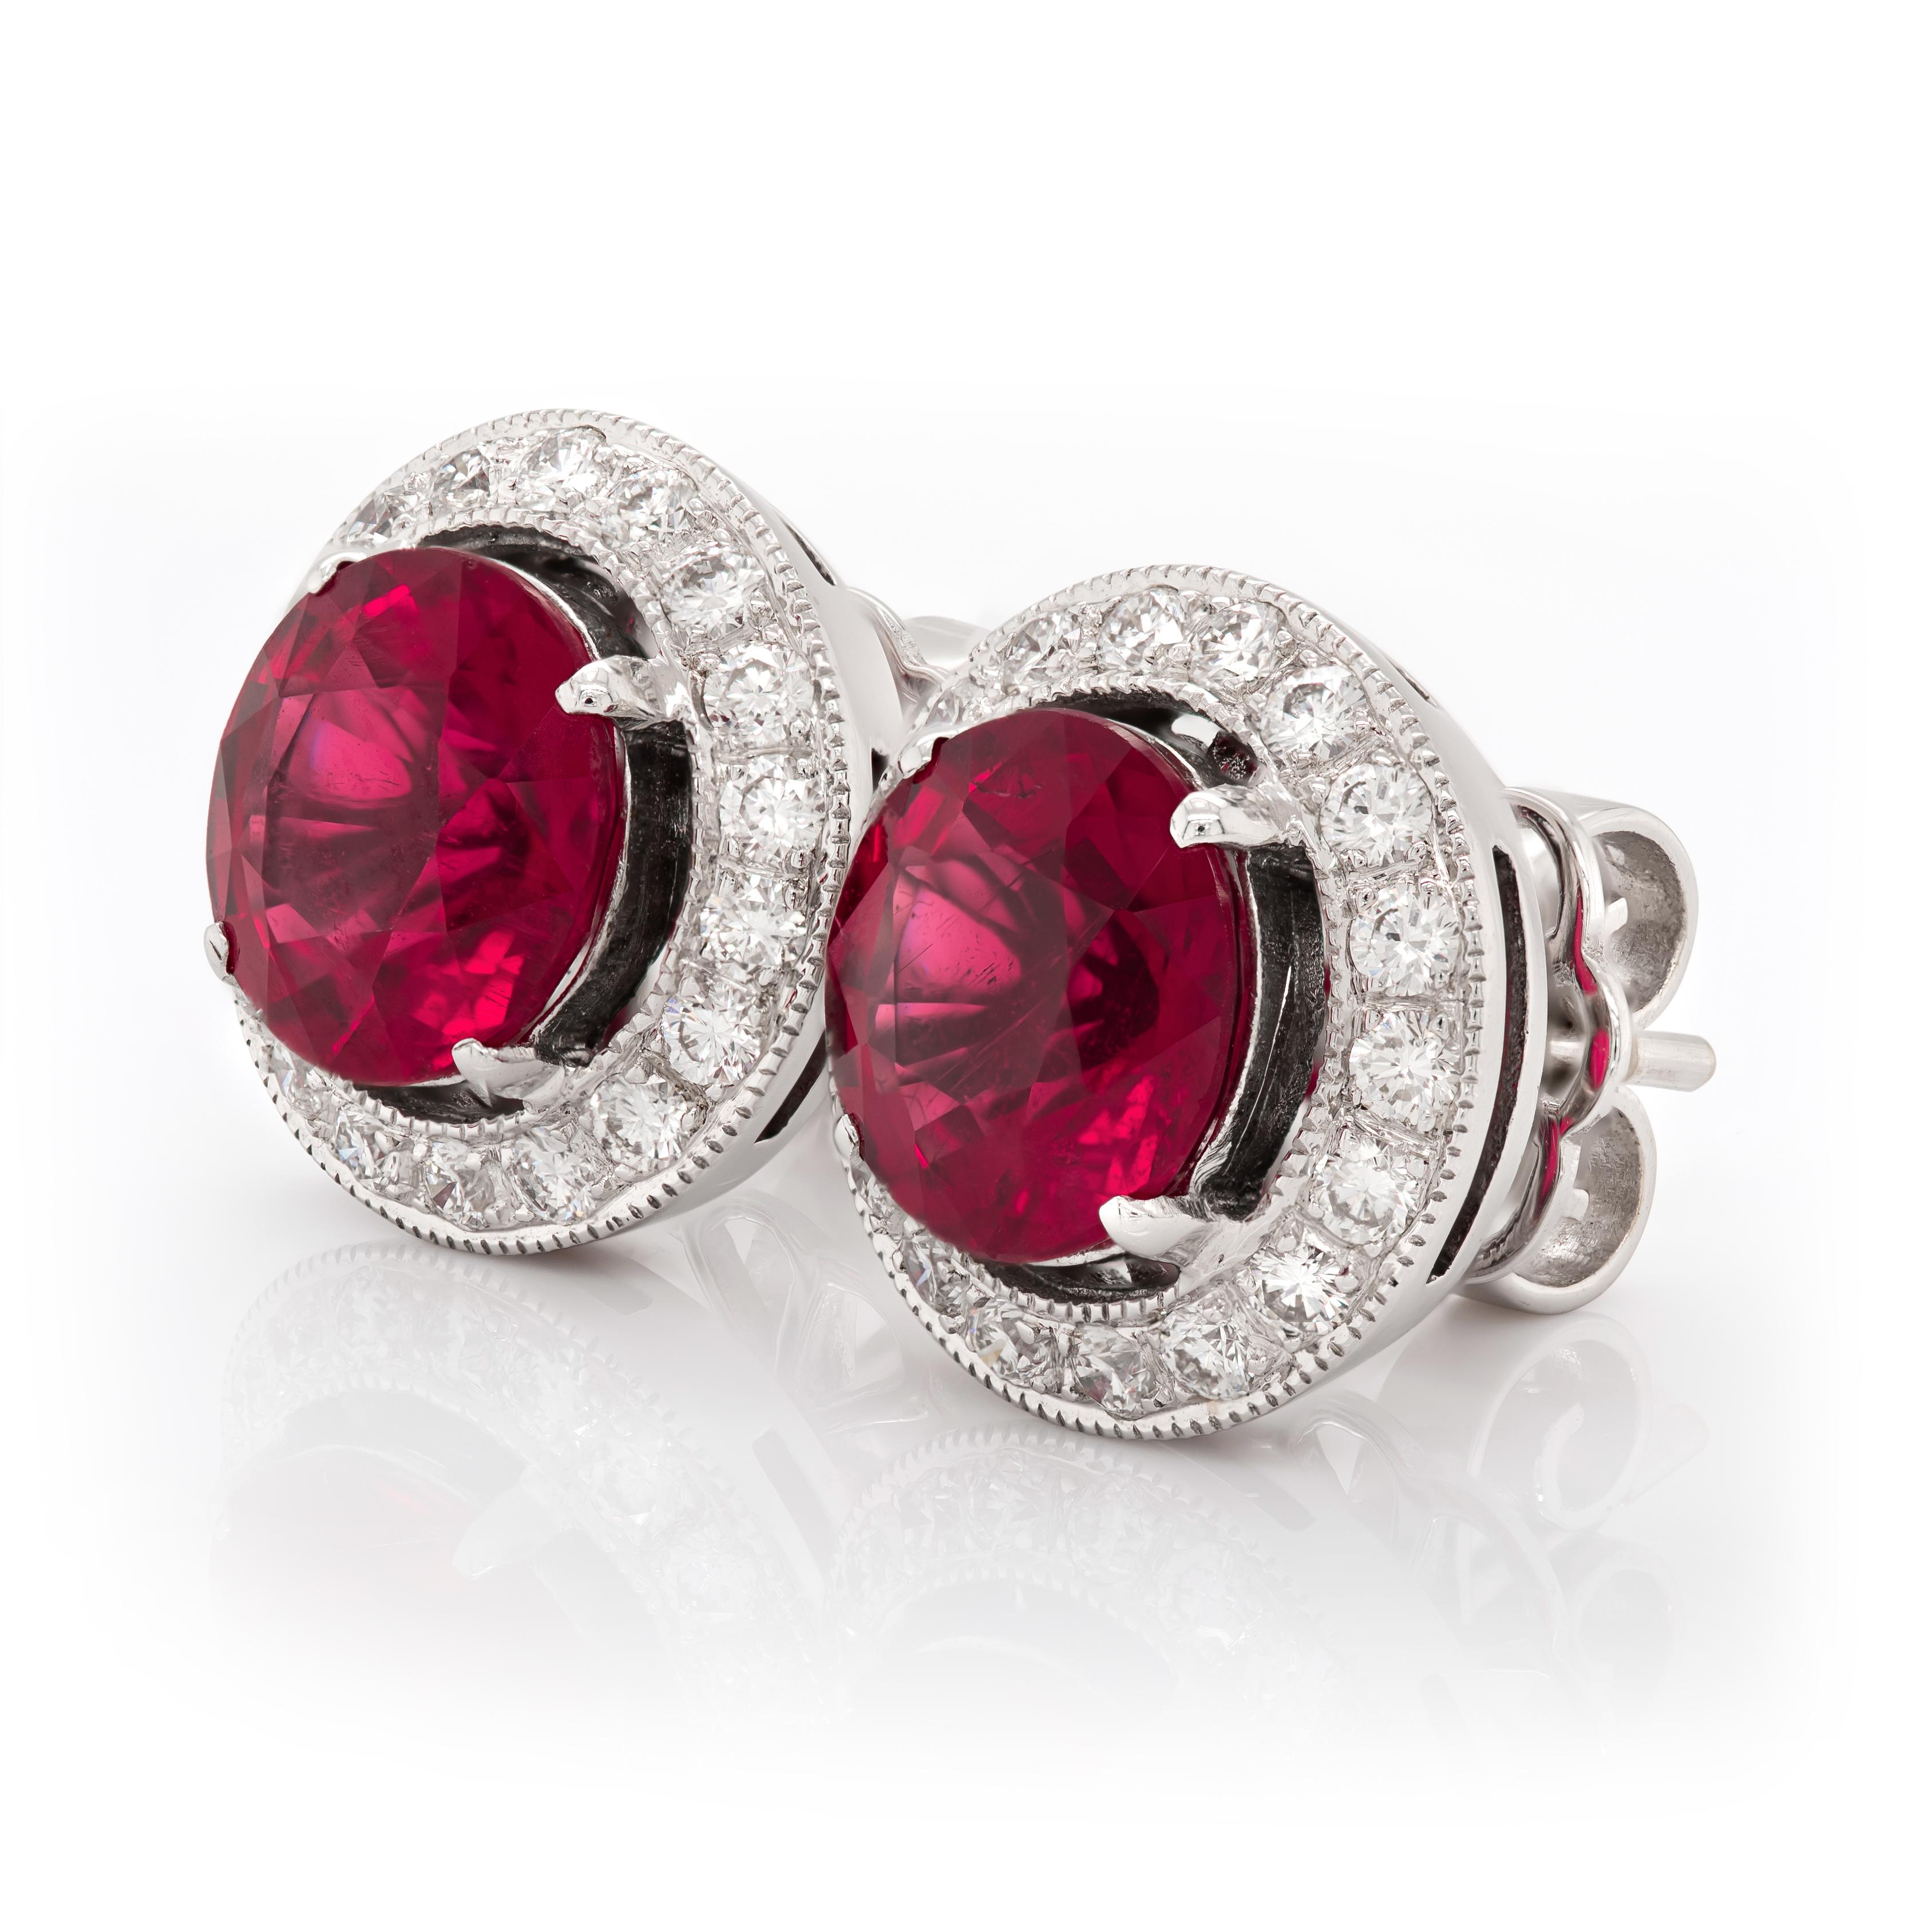 Set with perfectly matched 3.25 carats Rubellites, this pair of classic studs will add color to any outfit. Eye clean gems that have been cut to perfection to reveal an even fuchsia pink, adds grace to this pair. Set in 18K White Gold surrounded by